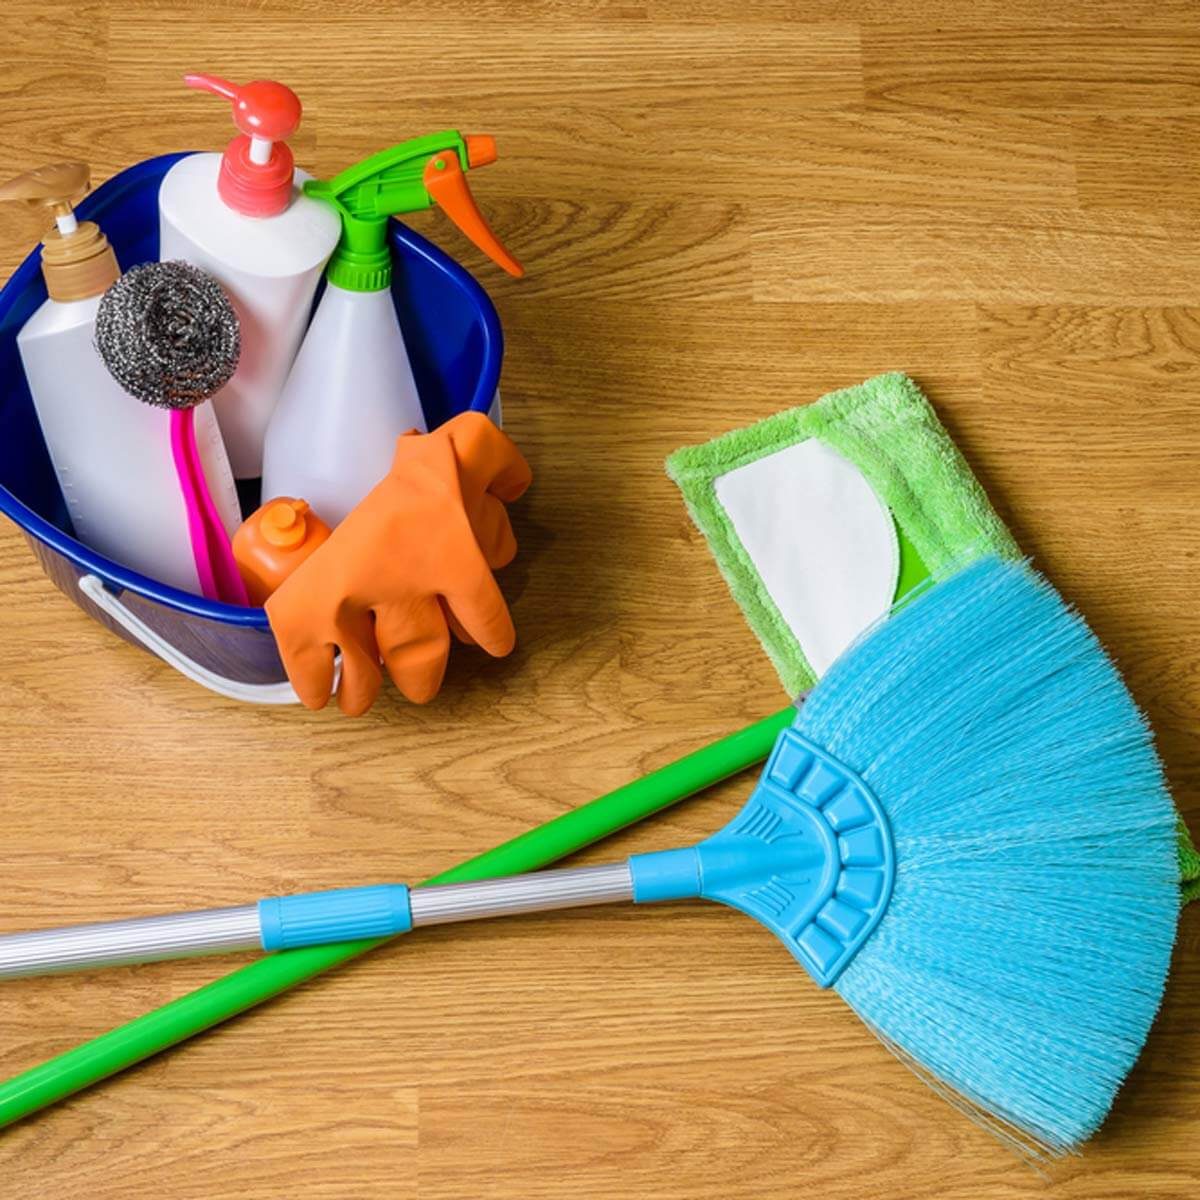 shutterstock_696897289 broom cleaning products